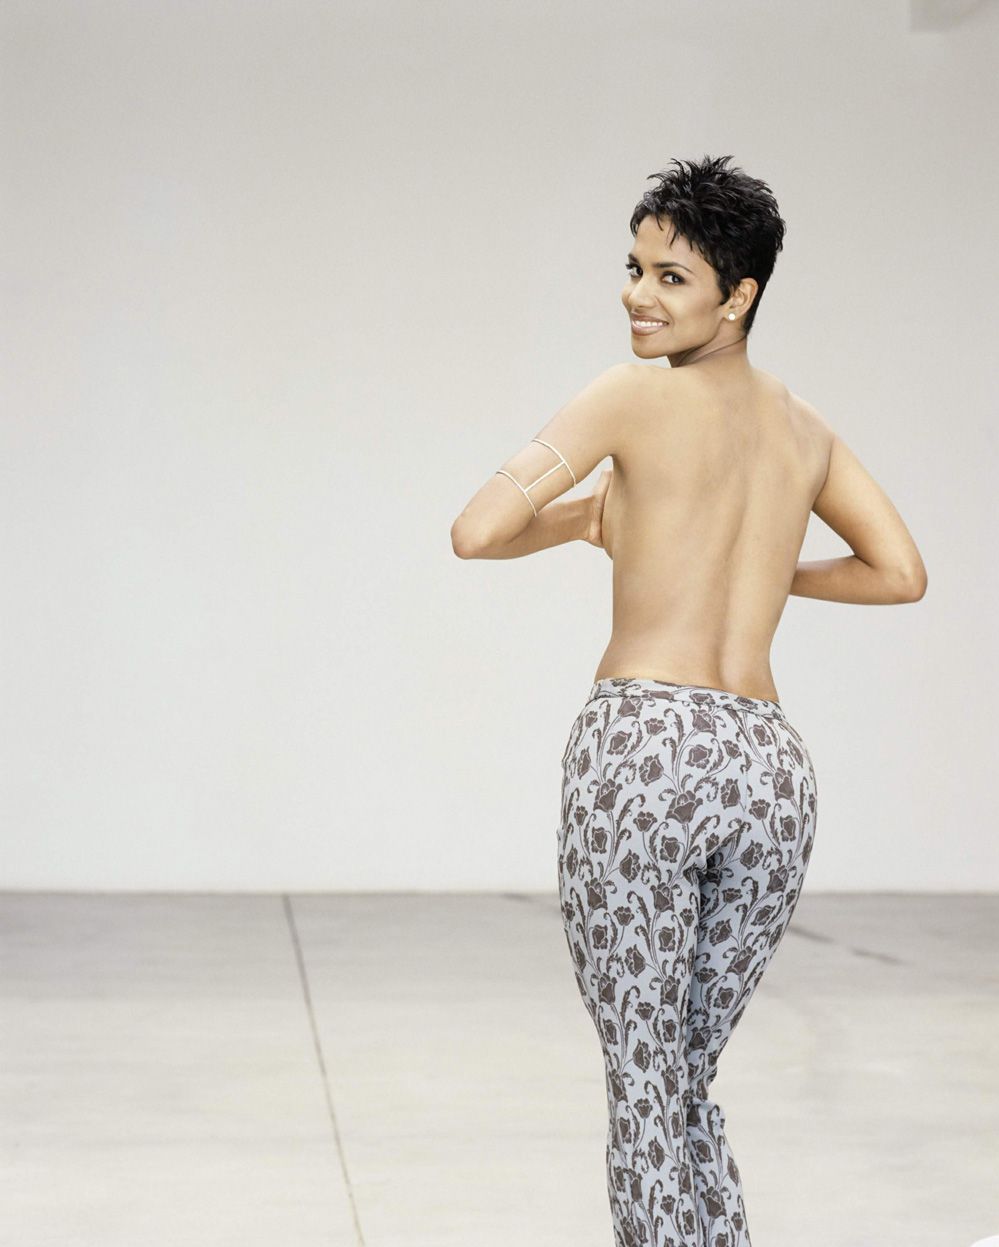 49 Hottest Halle Berry Big Butt Pictures Will Just Drive You ...